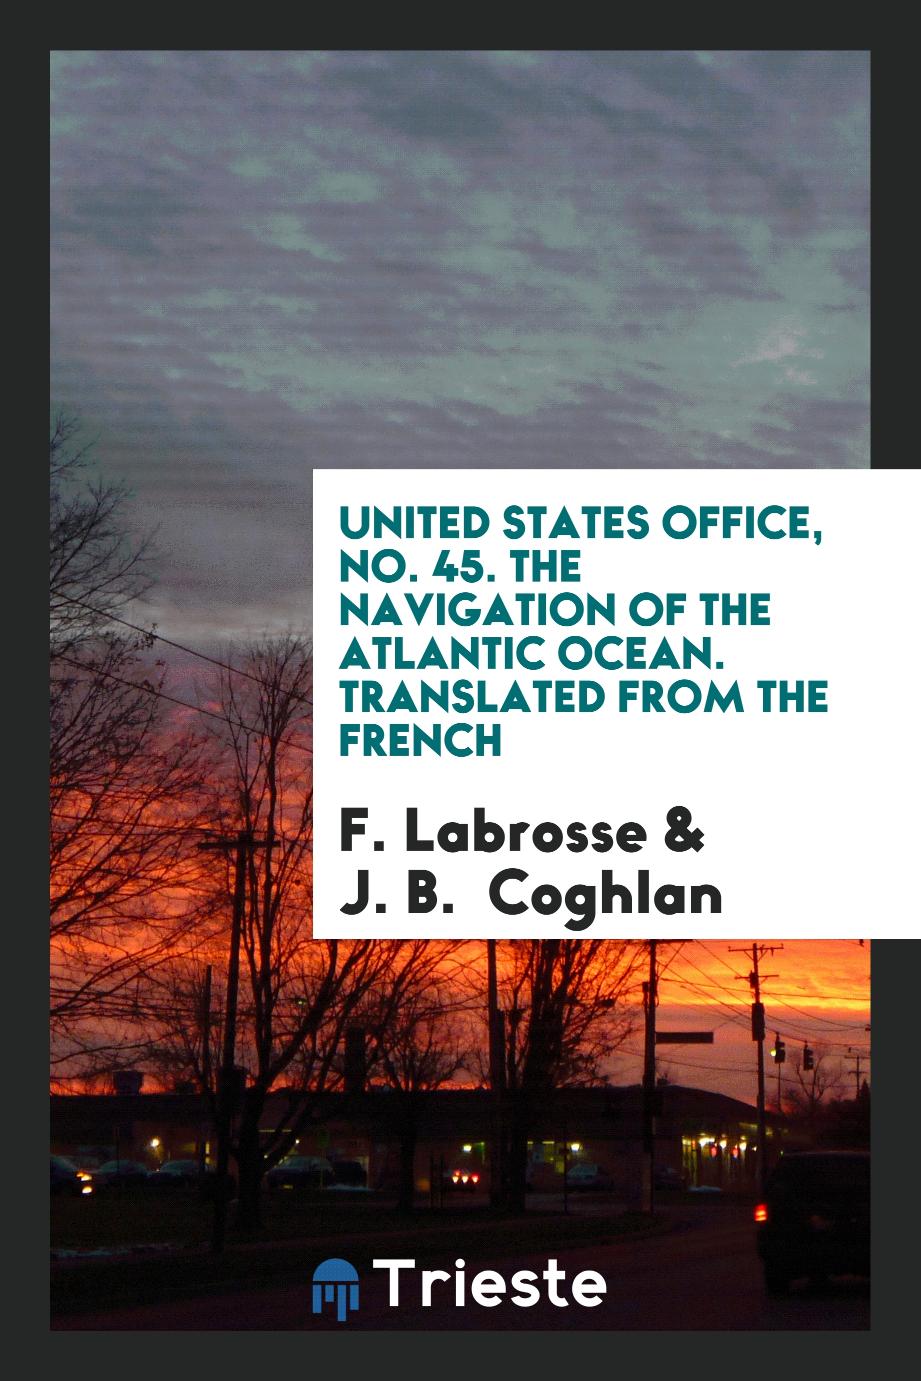 United States Office, No. 45. The Navigation of the Atlantic Ocean. Translated from the French